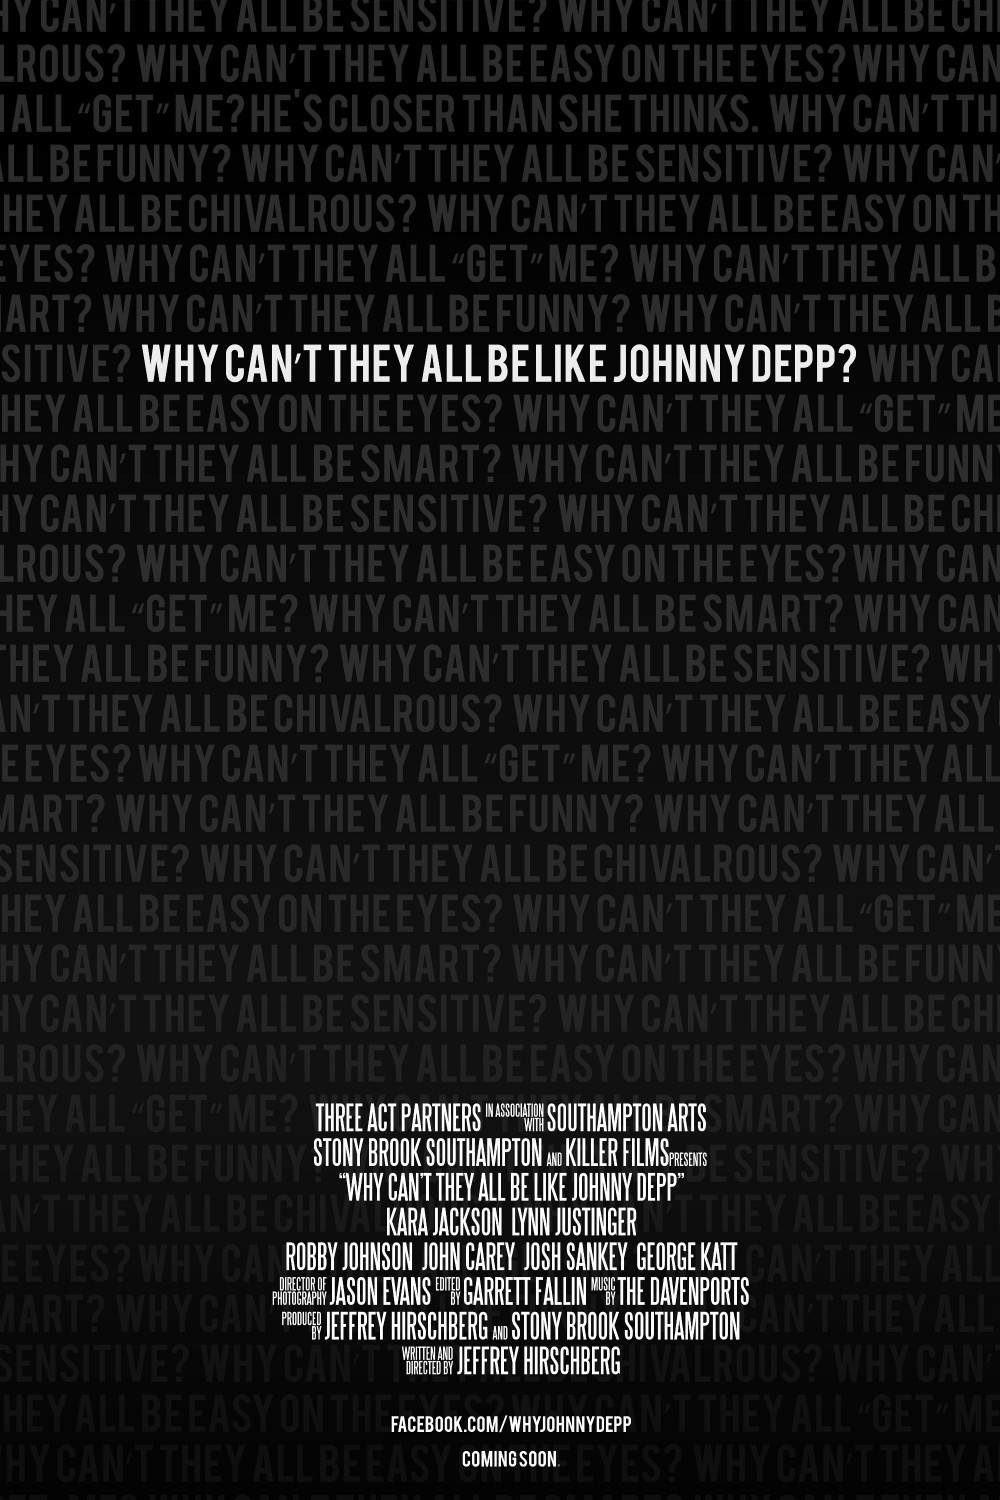 Extra Large Movie Poster Image for Why Can't They All Be Like Johnny Depp?